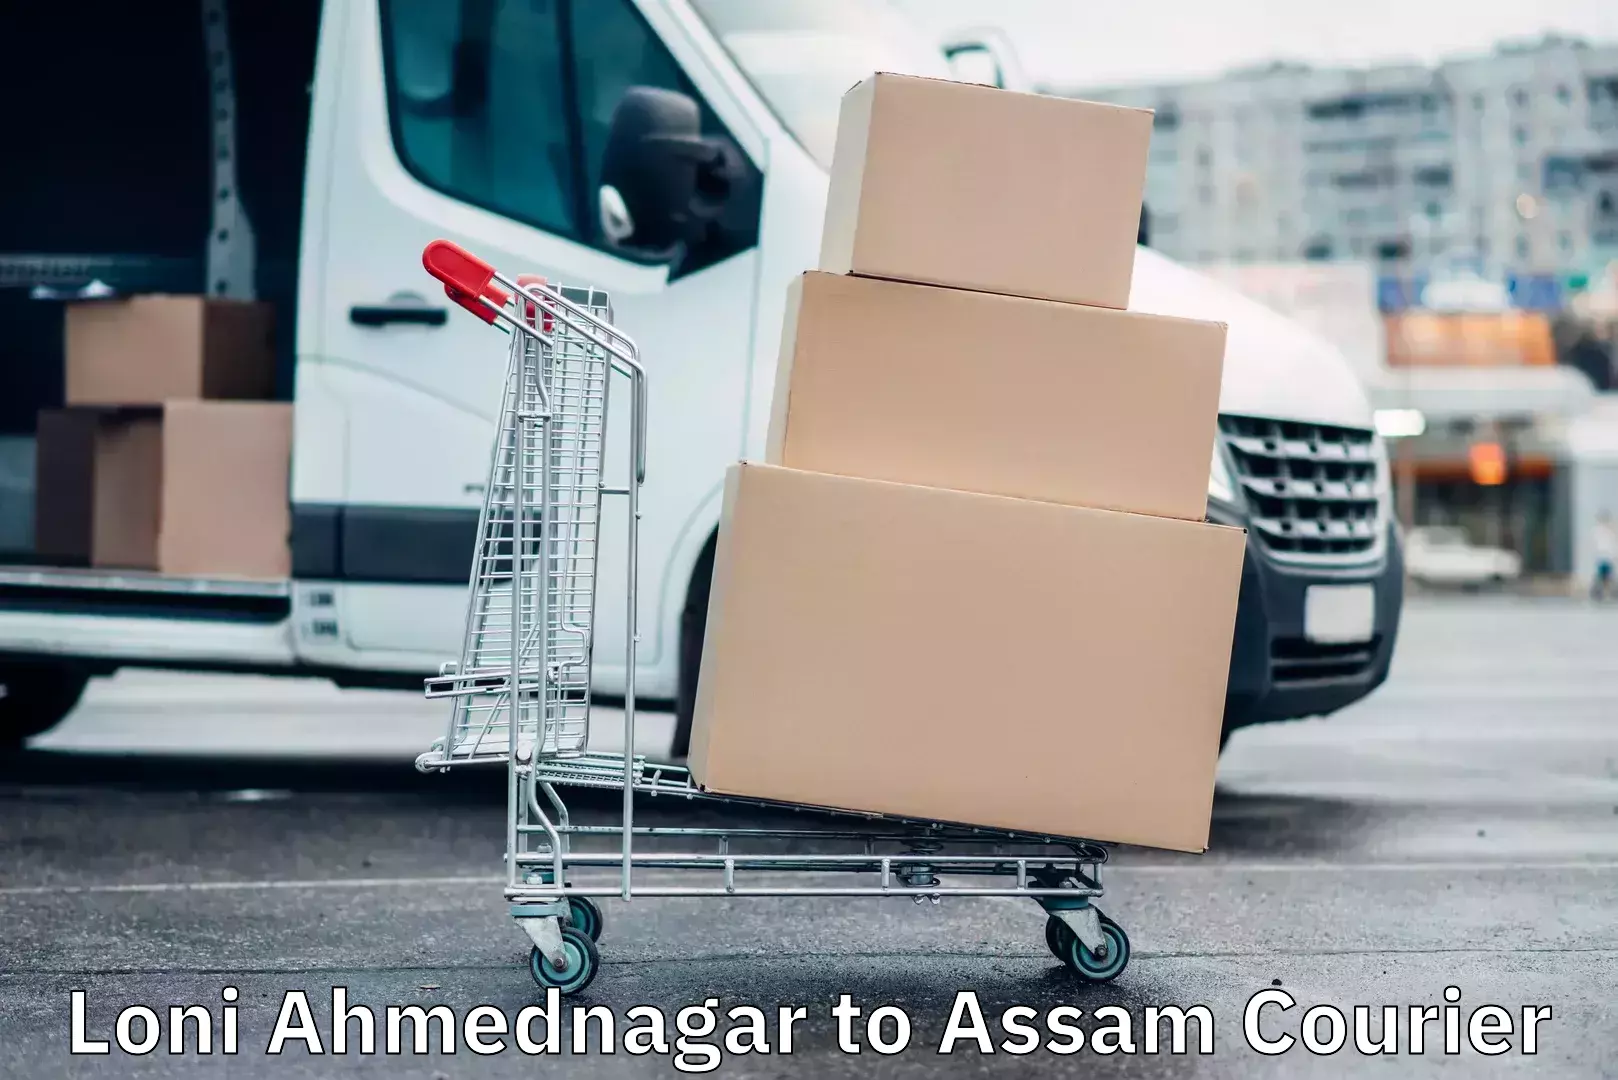 24-hour delivery options Loni Ahmednagar to Assam